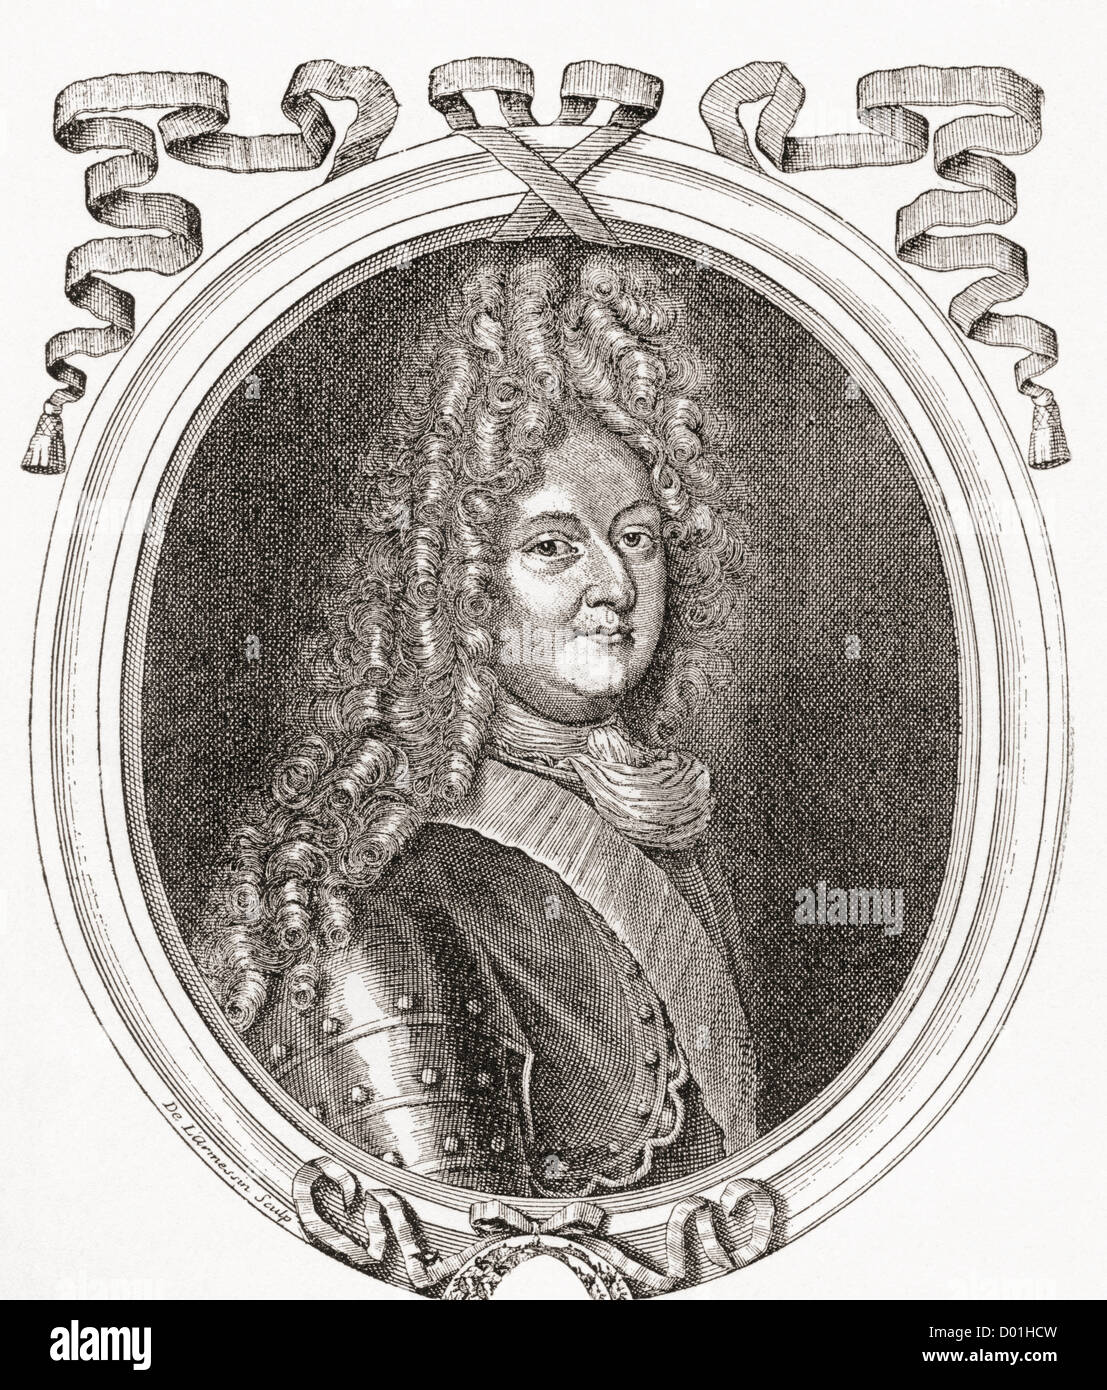 Louis of France, Grand Dauphin, 1661 –1711. Eldest son and heir apparent of Louis XIV, King of France. Stock Photo